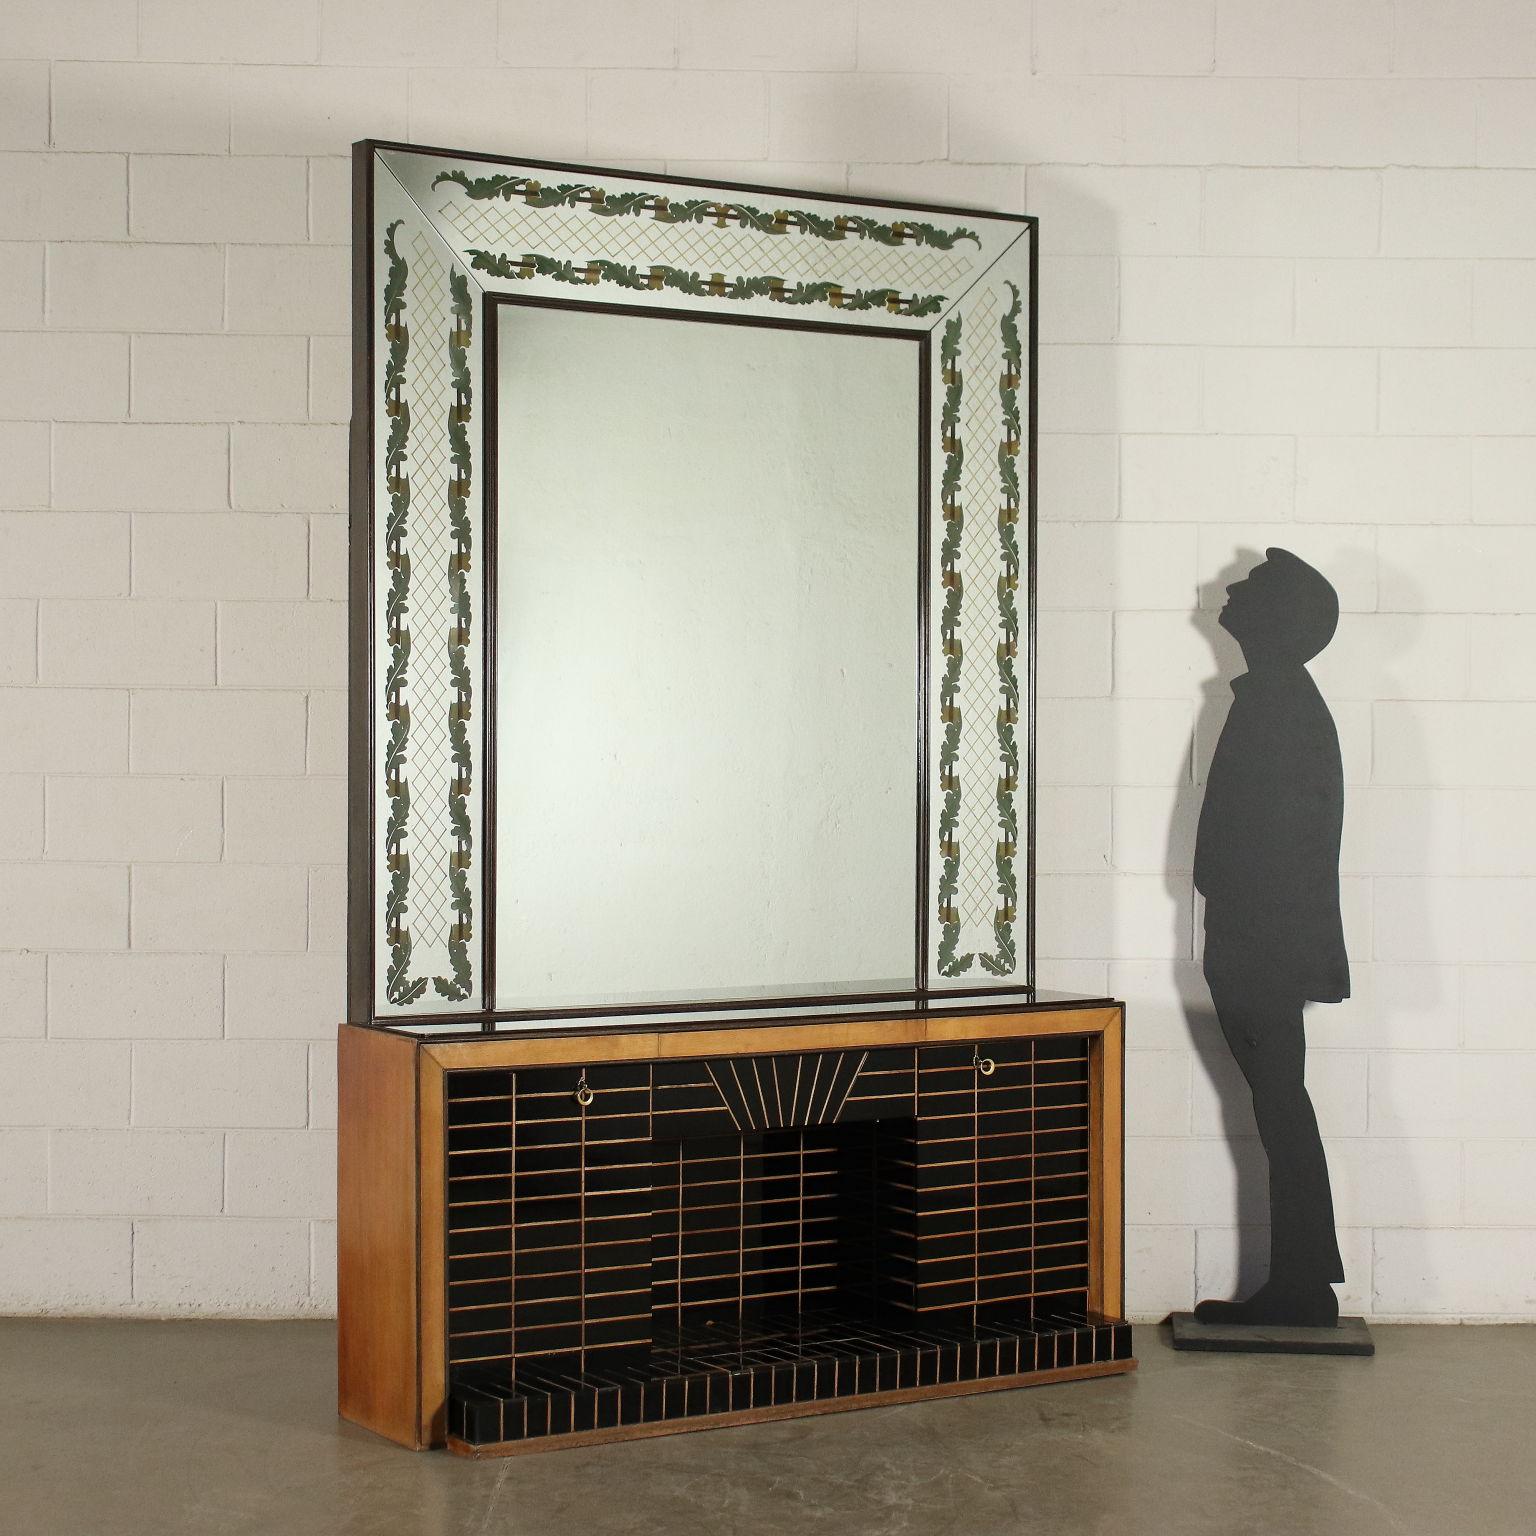 Large mirror in the style of Brusotti, mounted on a fake fireplace, back-lit mirror with a gilded frame, fireplace with hinged doors, wood covered with tiles in opaline glass, interiors with mirrored glass tiles.